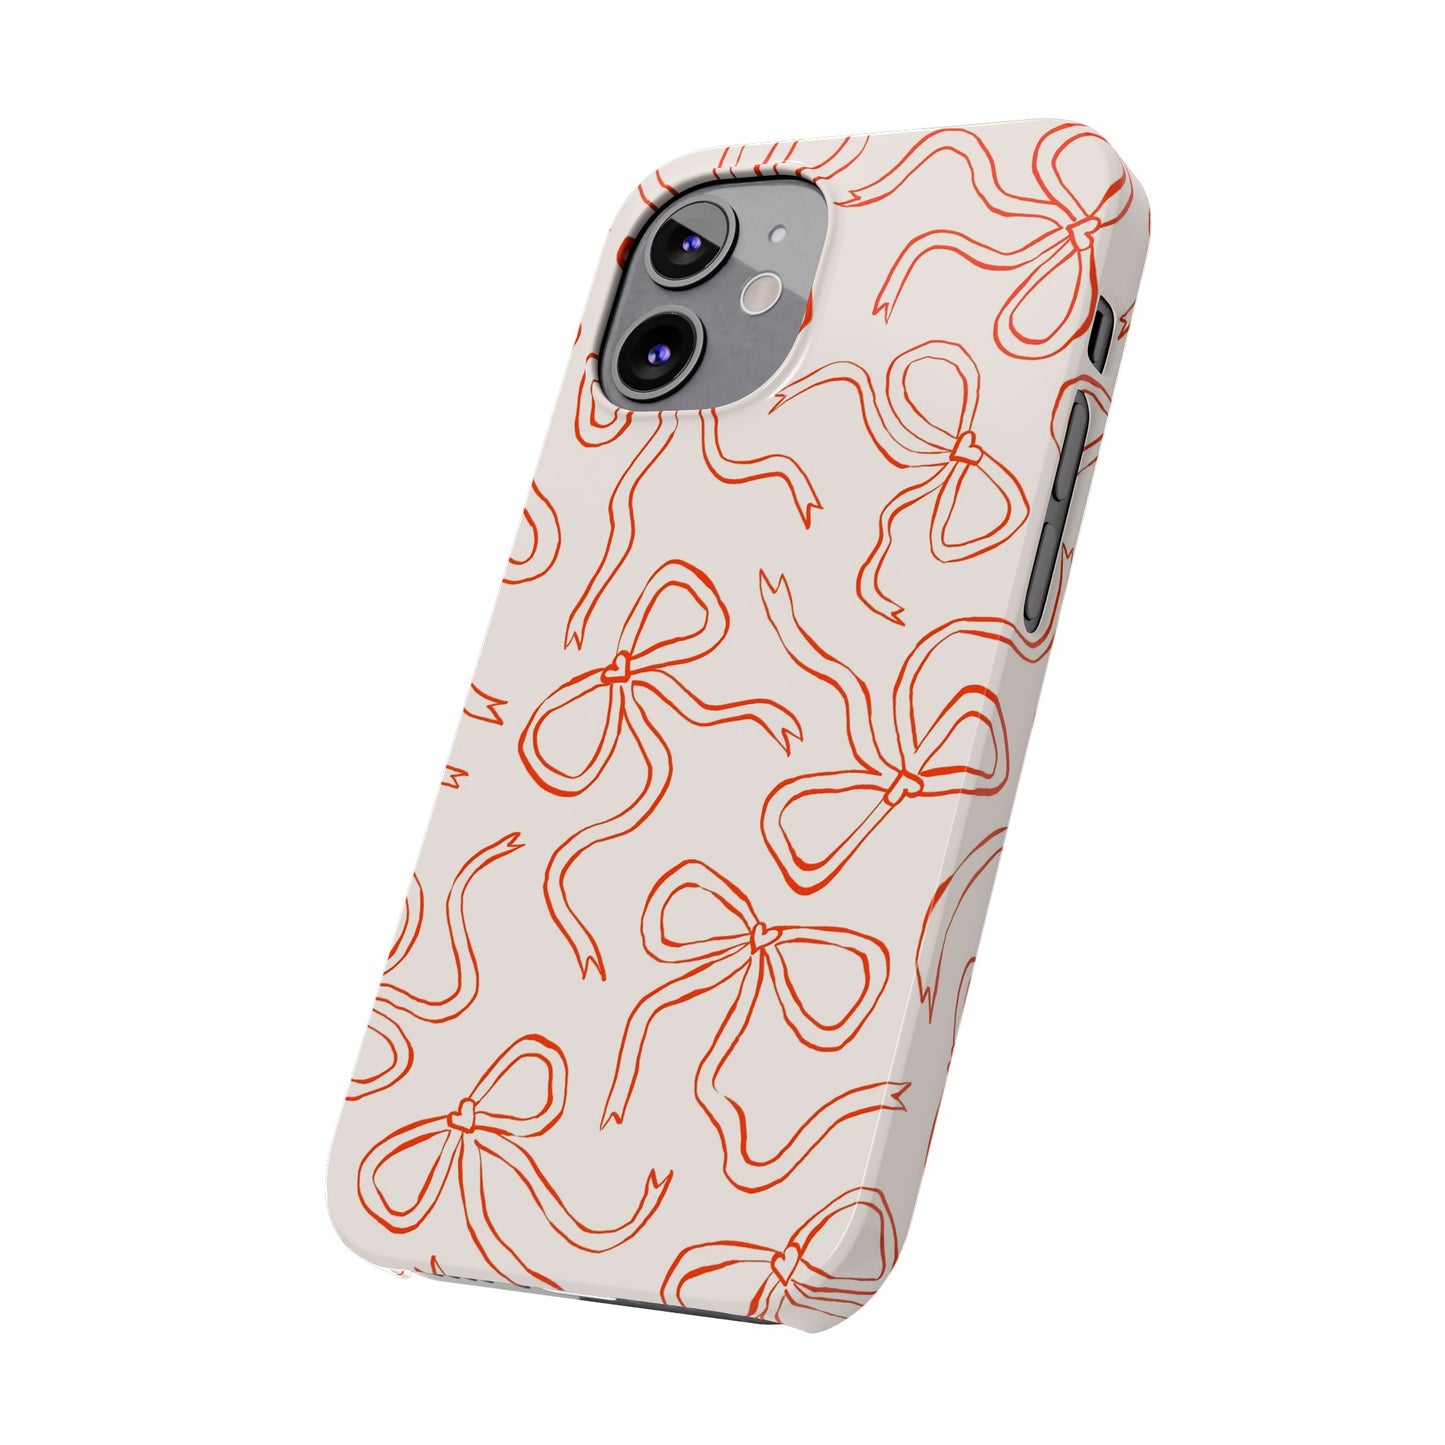 Bow Iphone Case